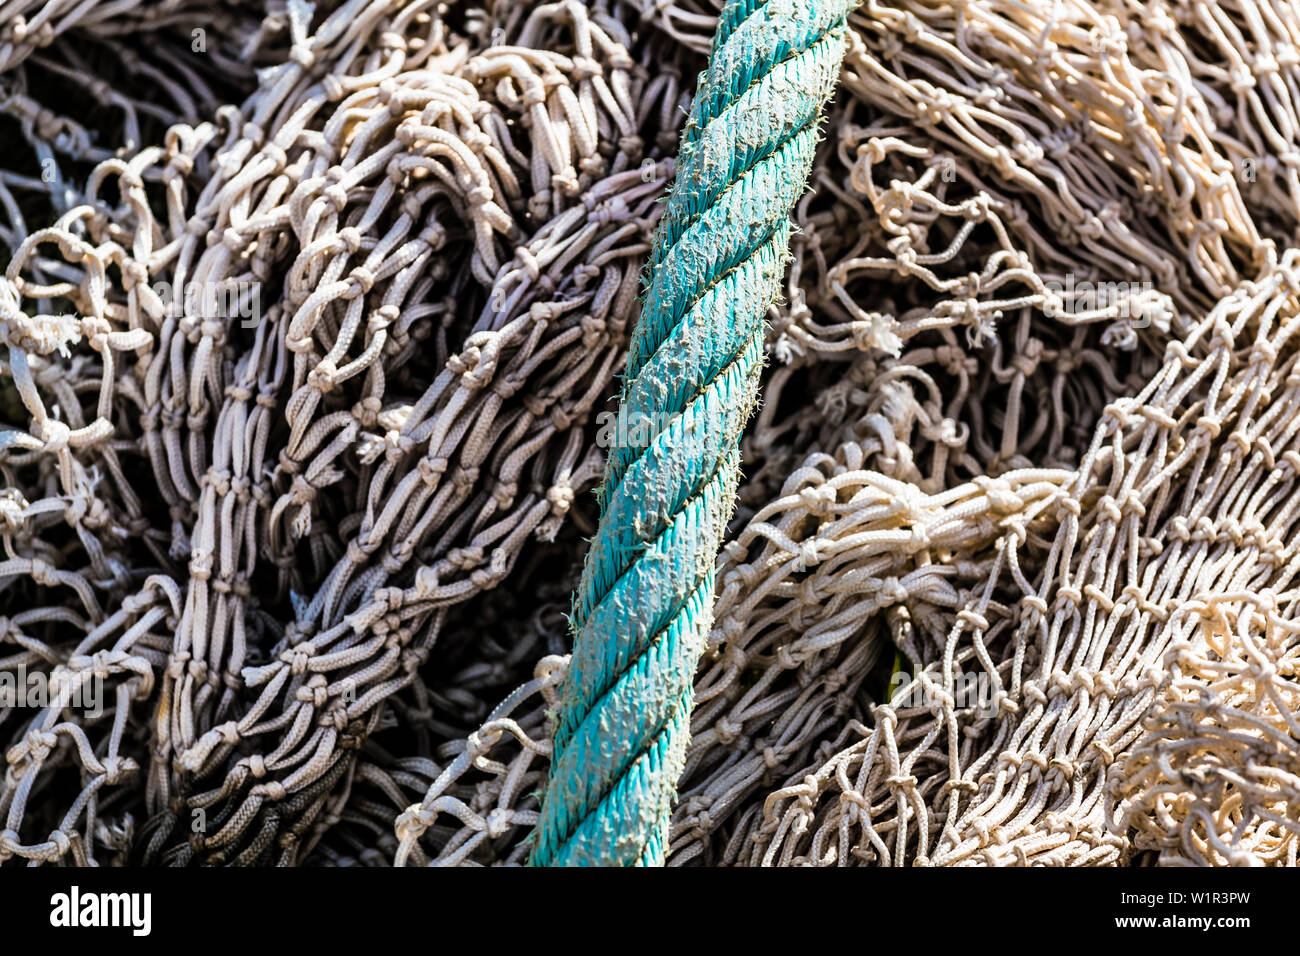 Fishing nets and a thick rope in the harbour, Port de Sóller, Mallorca, Spain Stock Photo